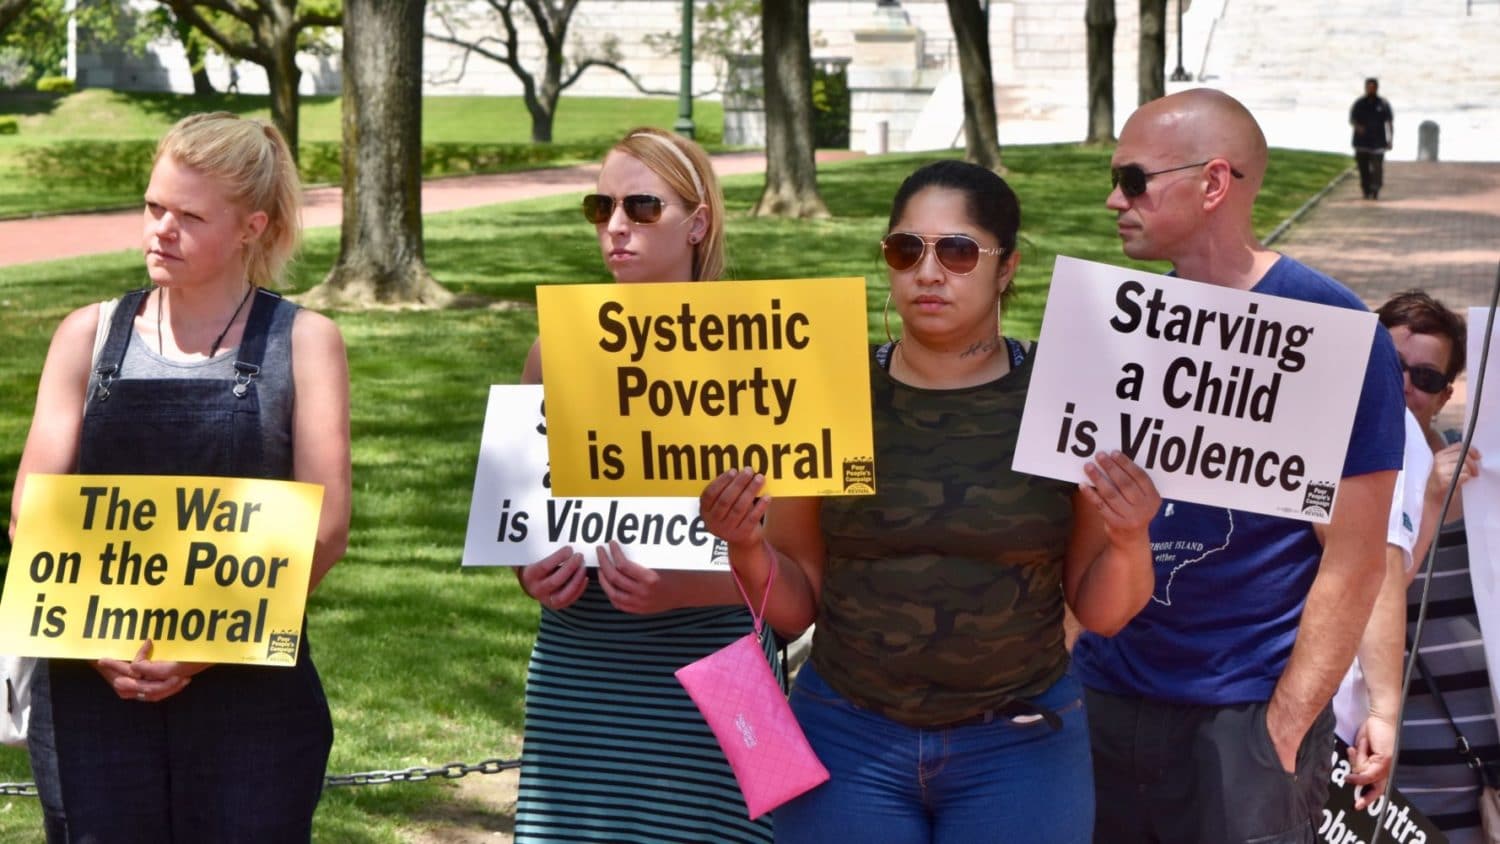 Week two of the Rhode Island Poor People’s Campaign takes on systemic racism and poverty